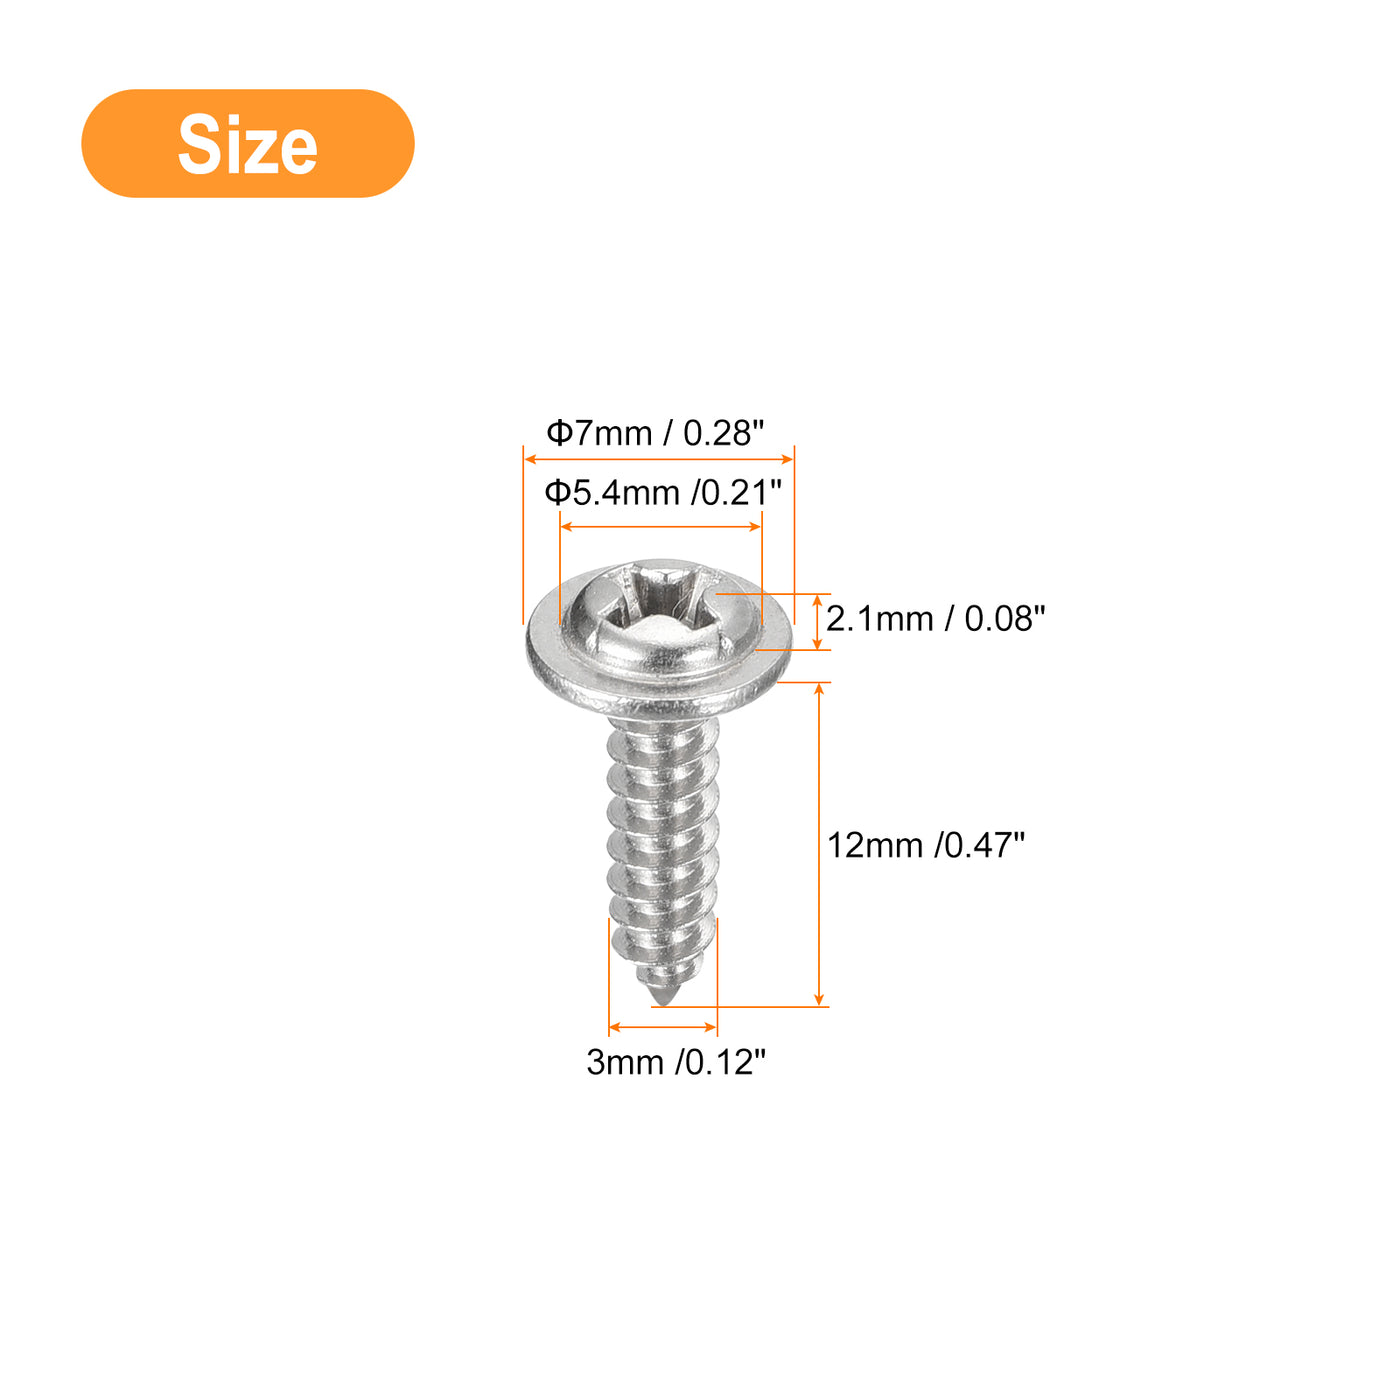 uxcell Uxcell ST3x12mm Phillips Pan Head Self-tapping Screw with Washer, 100pcs - 304 Stainless Steel Wood Screw Full Thread (Silver)